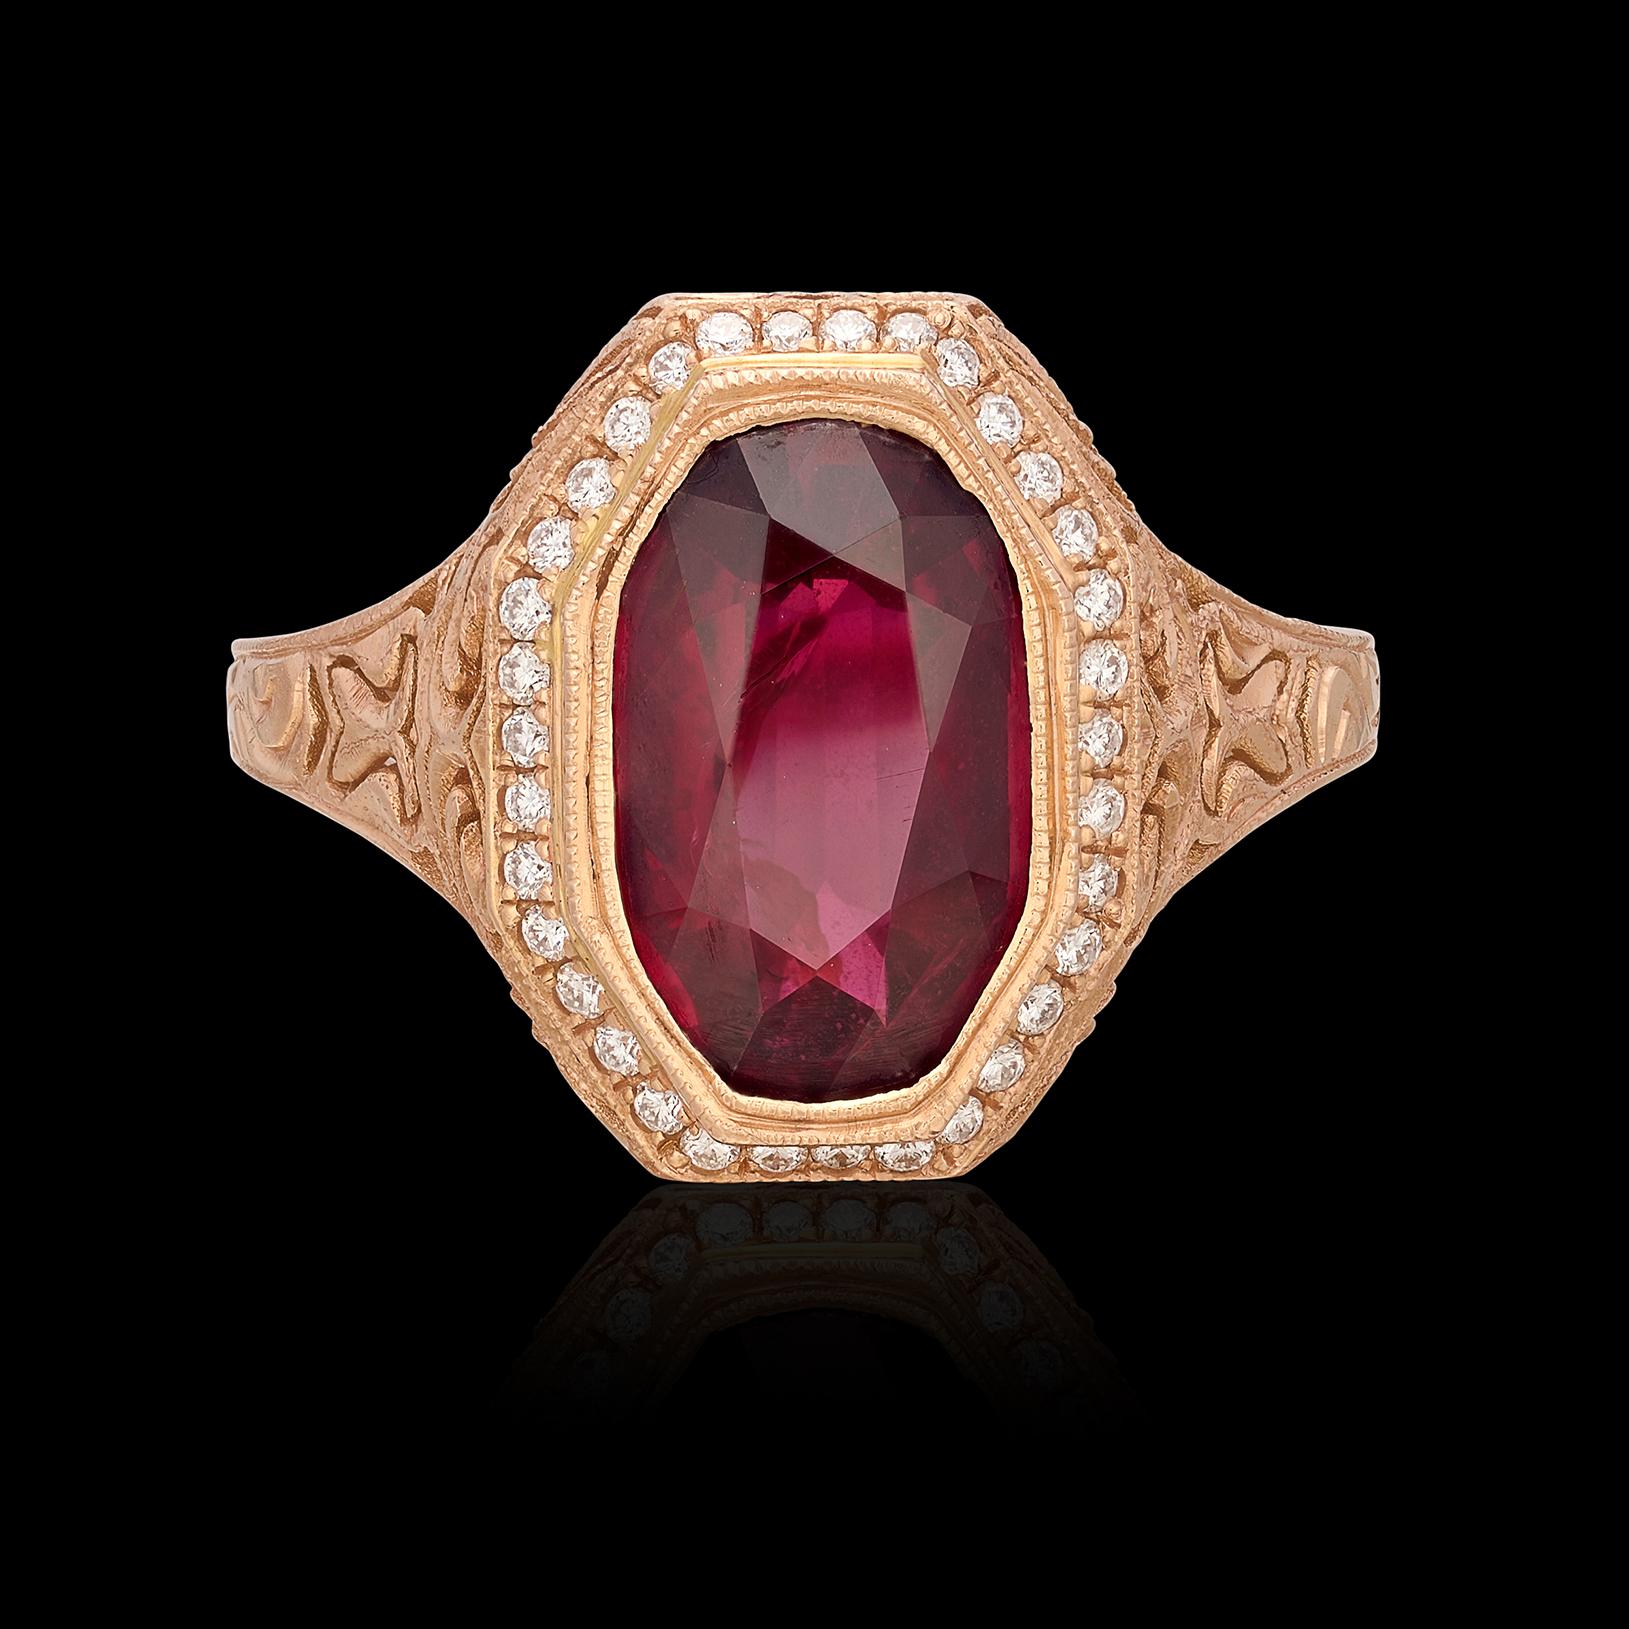 Become mesmerized in the deep red of this natural unheated ruby! The oval shaped brilliant step-cut stone weighs 3.45 carats, and is accented by a halo of 34 round brilliant-cut diamonds for a total approximate weight of 0.25cts in an openwork and